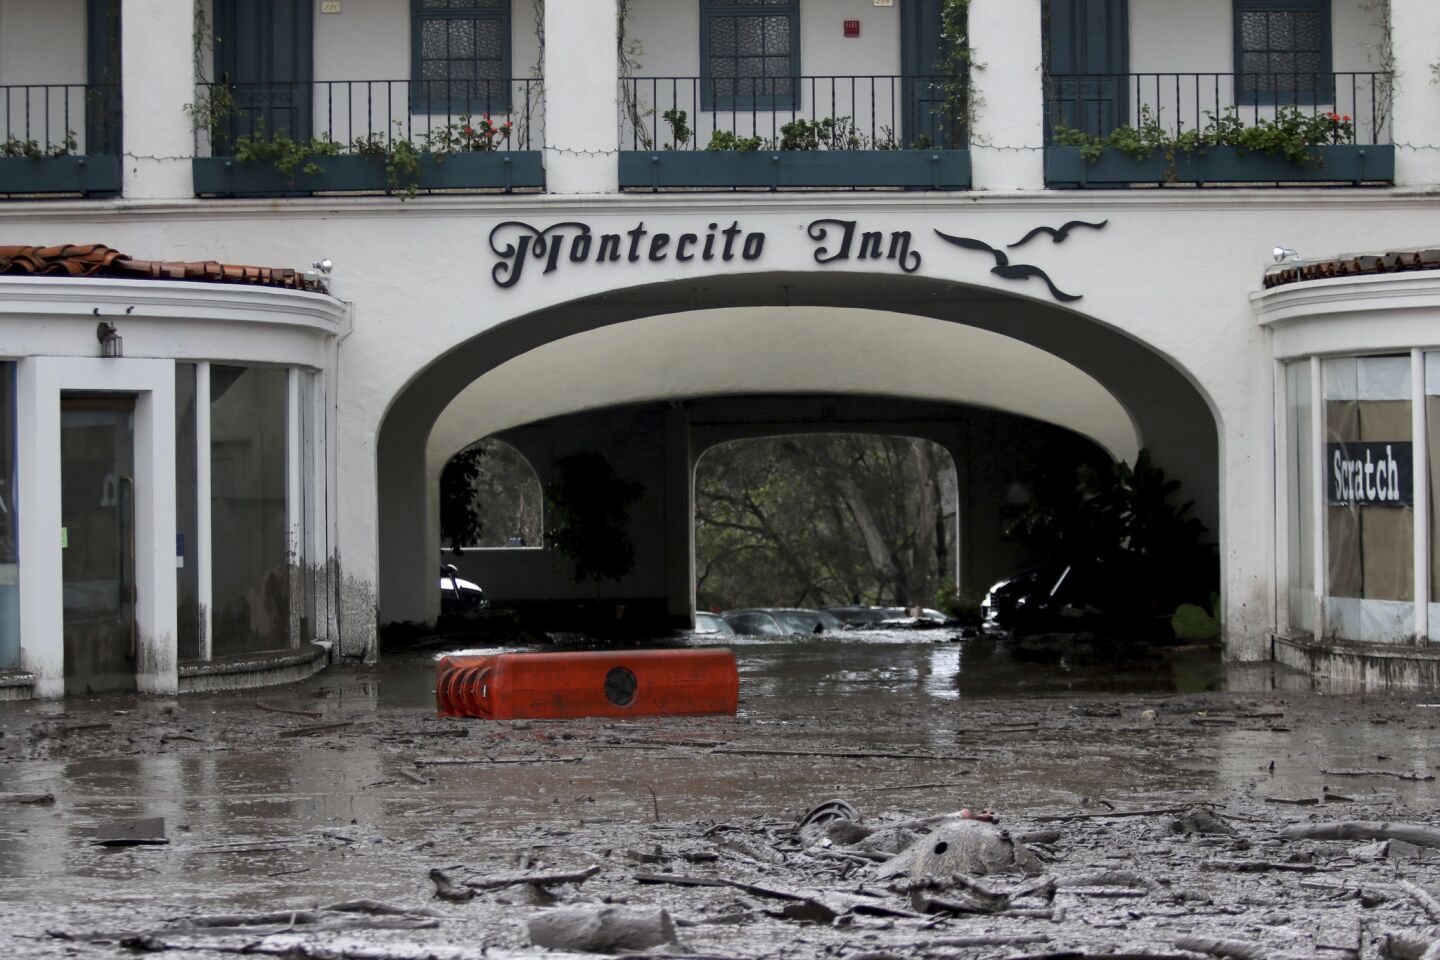 Debris and mud cover the entrance of the Montecito Inn after heavy rain brought flash flooding and mudslides to the area.